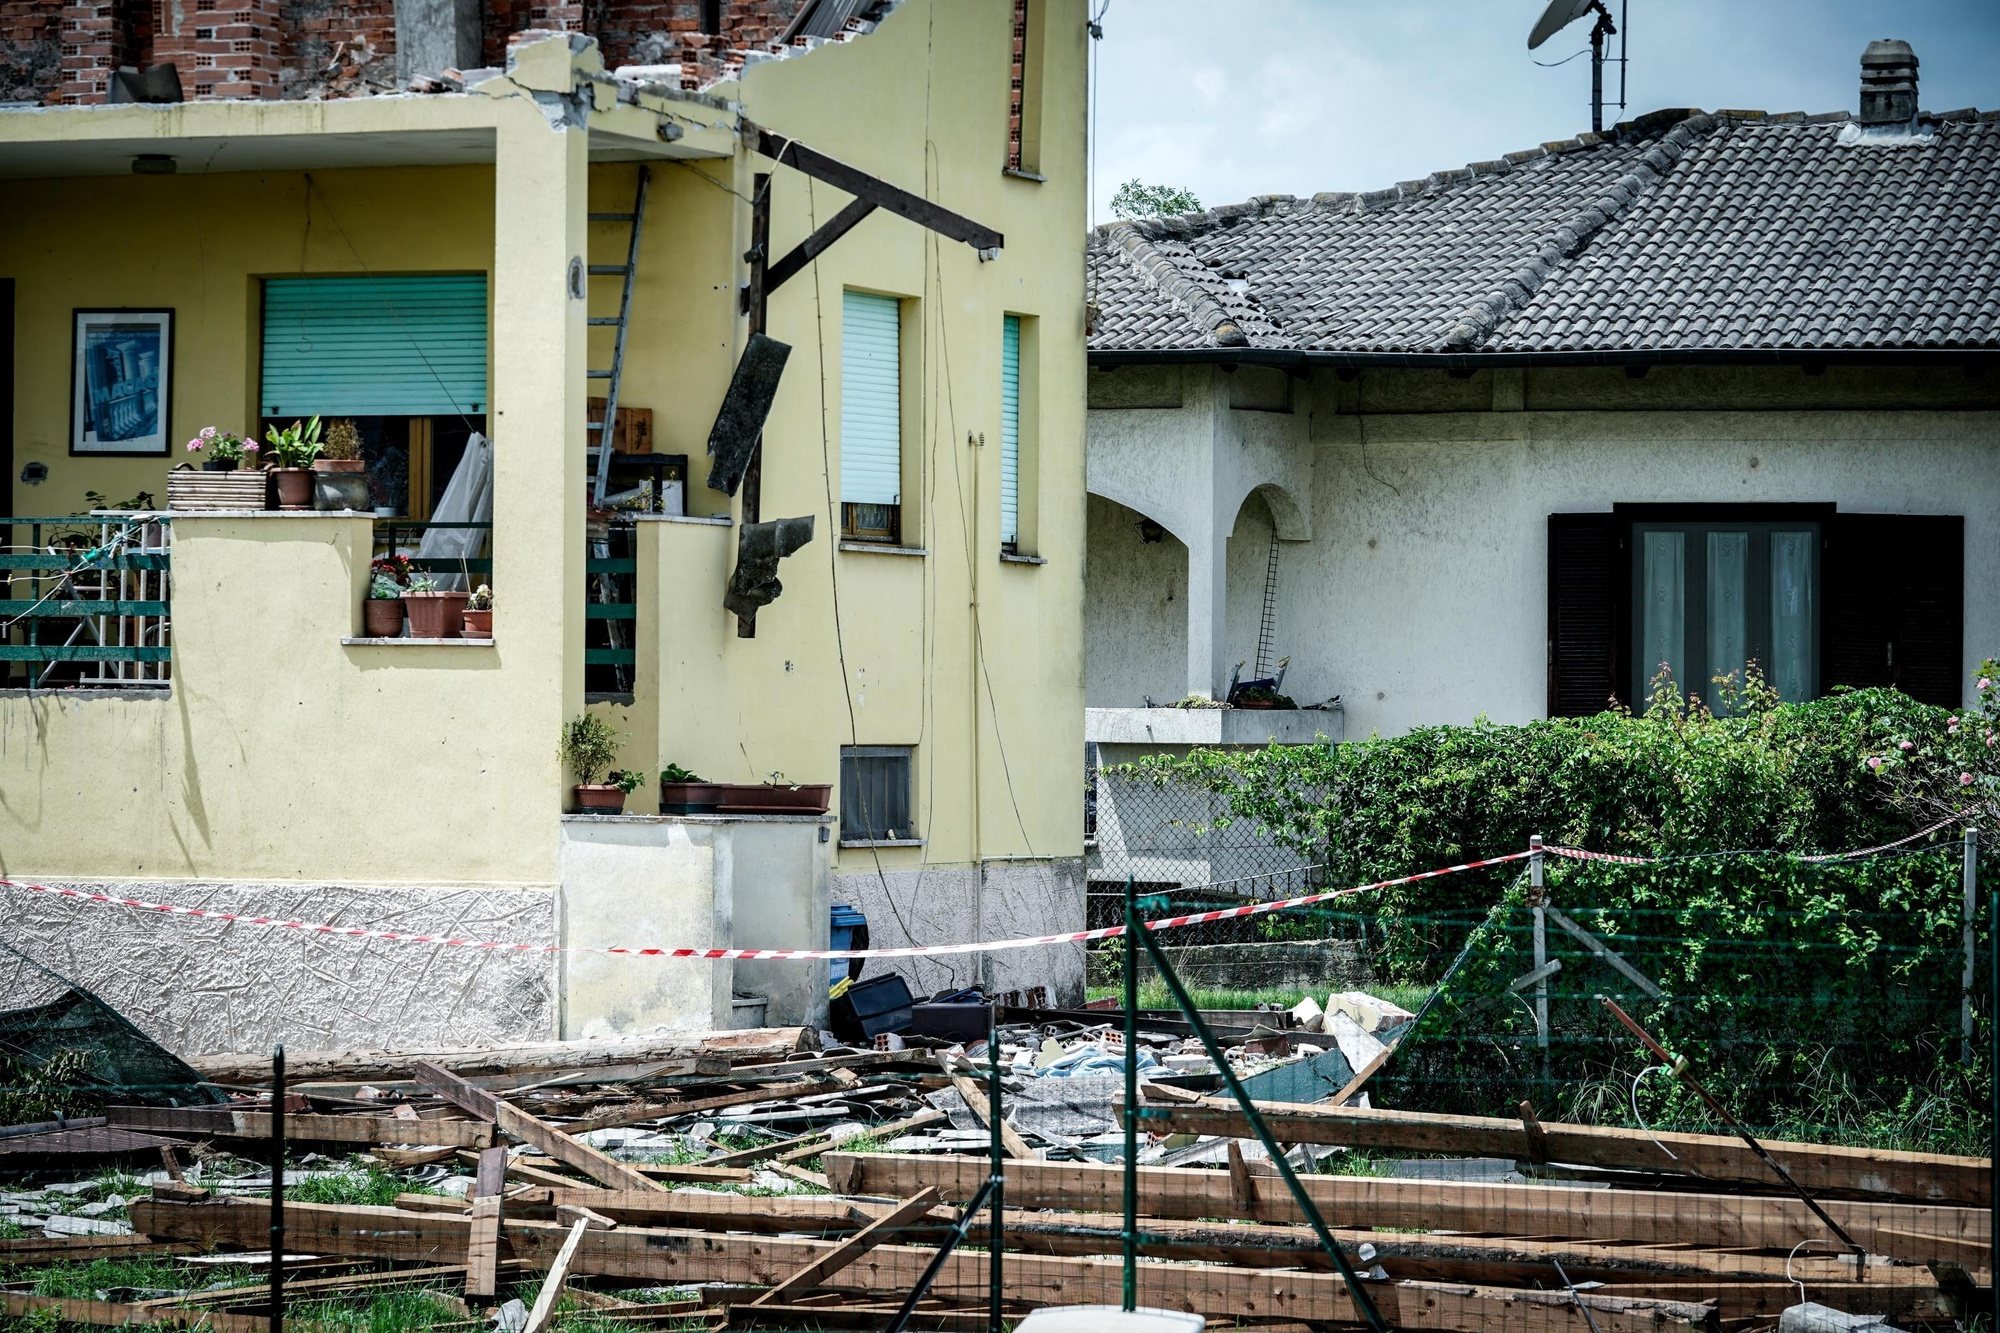 epa11447108 A building with its roof damaged by a whirlwind in Busano Canavese, near Turin, Italy, 30 June 2024. Storms hit the Alpine valleys of Turin, in particular the Orco Valley, on 29 June, causing landslides, floods, and overflowing streams, and leaving people displaced and some localities isolated. Dozens of people had to leave their places of residence late on 29 June due to the severe weather.  EPA/TINO ROMANO